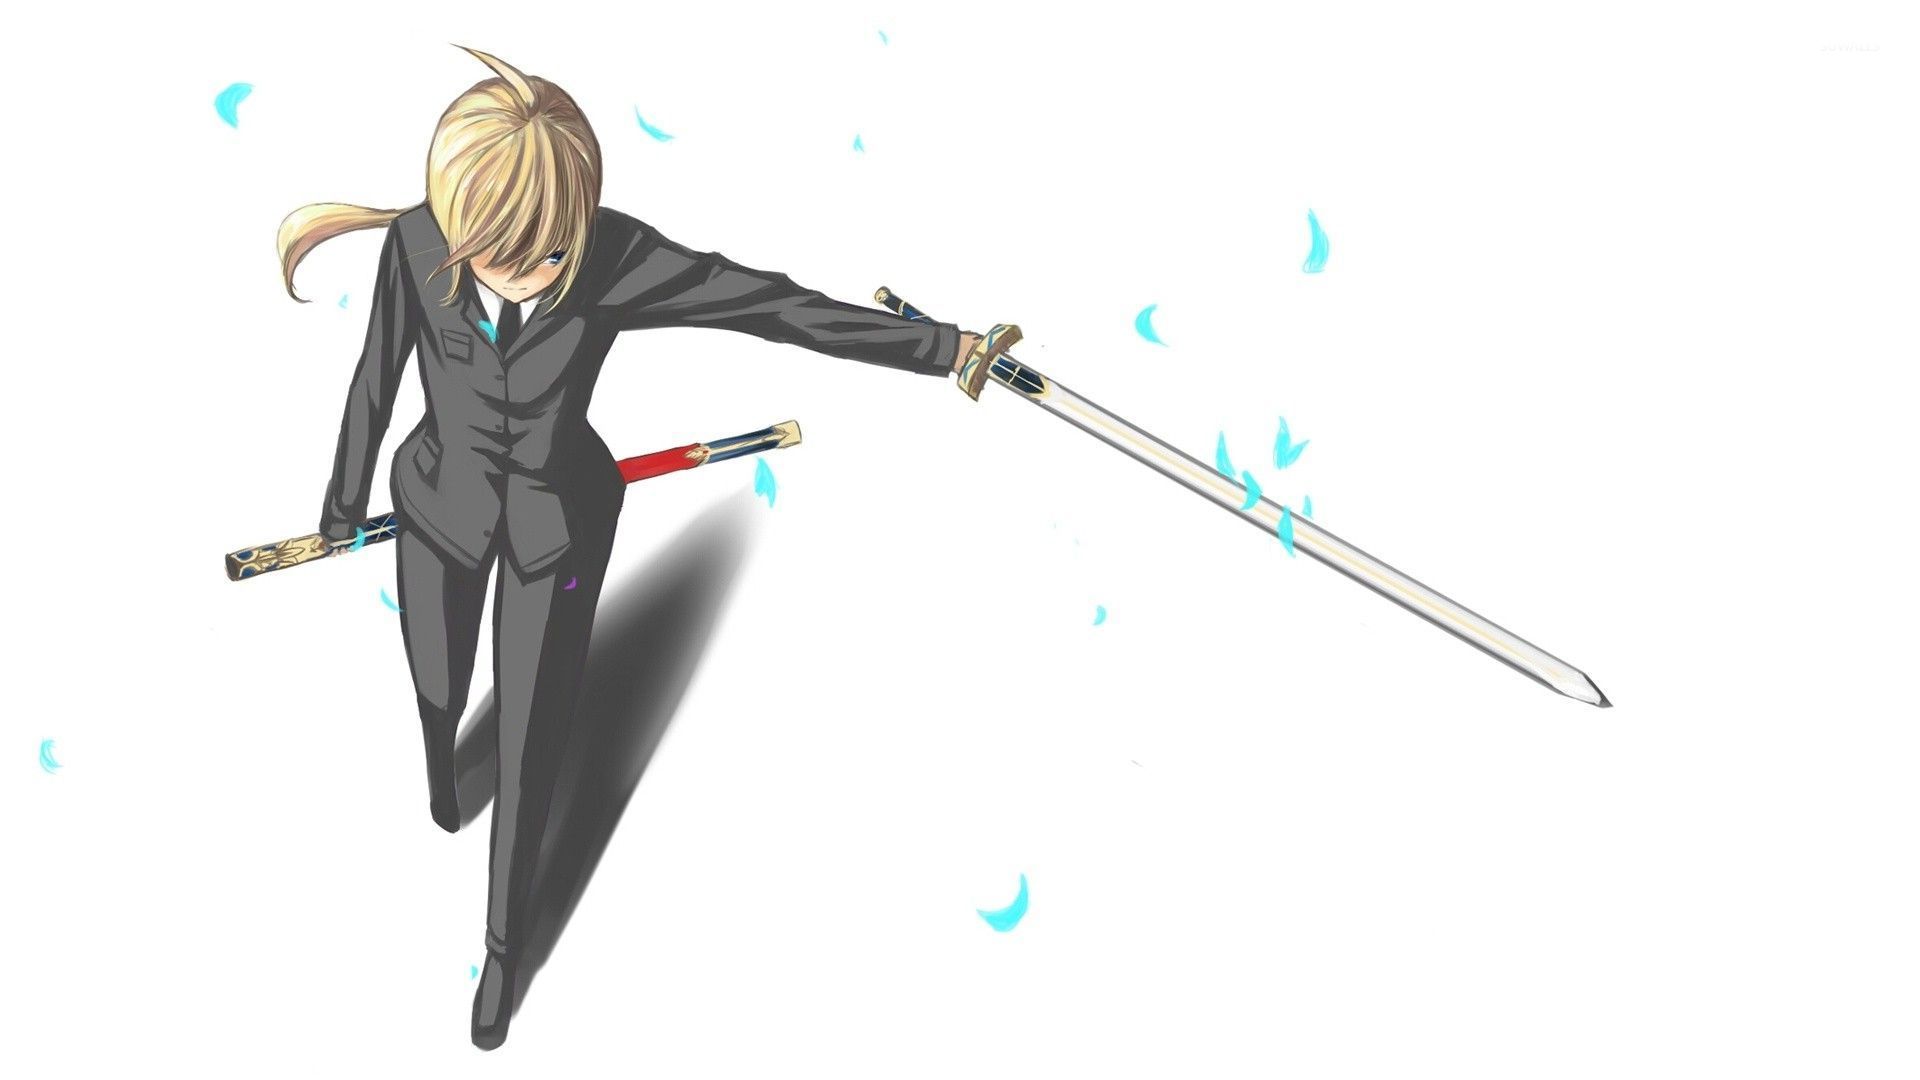 Saber in a black suit - Fate/stay night wallpaper - Anime wallpapers -  #50842